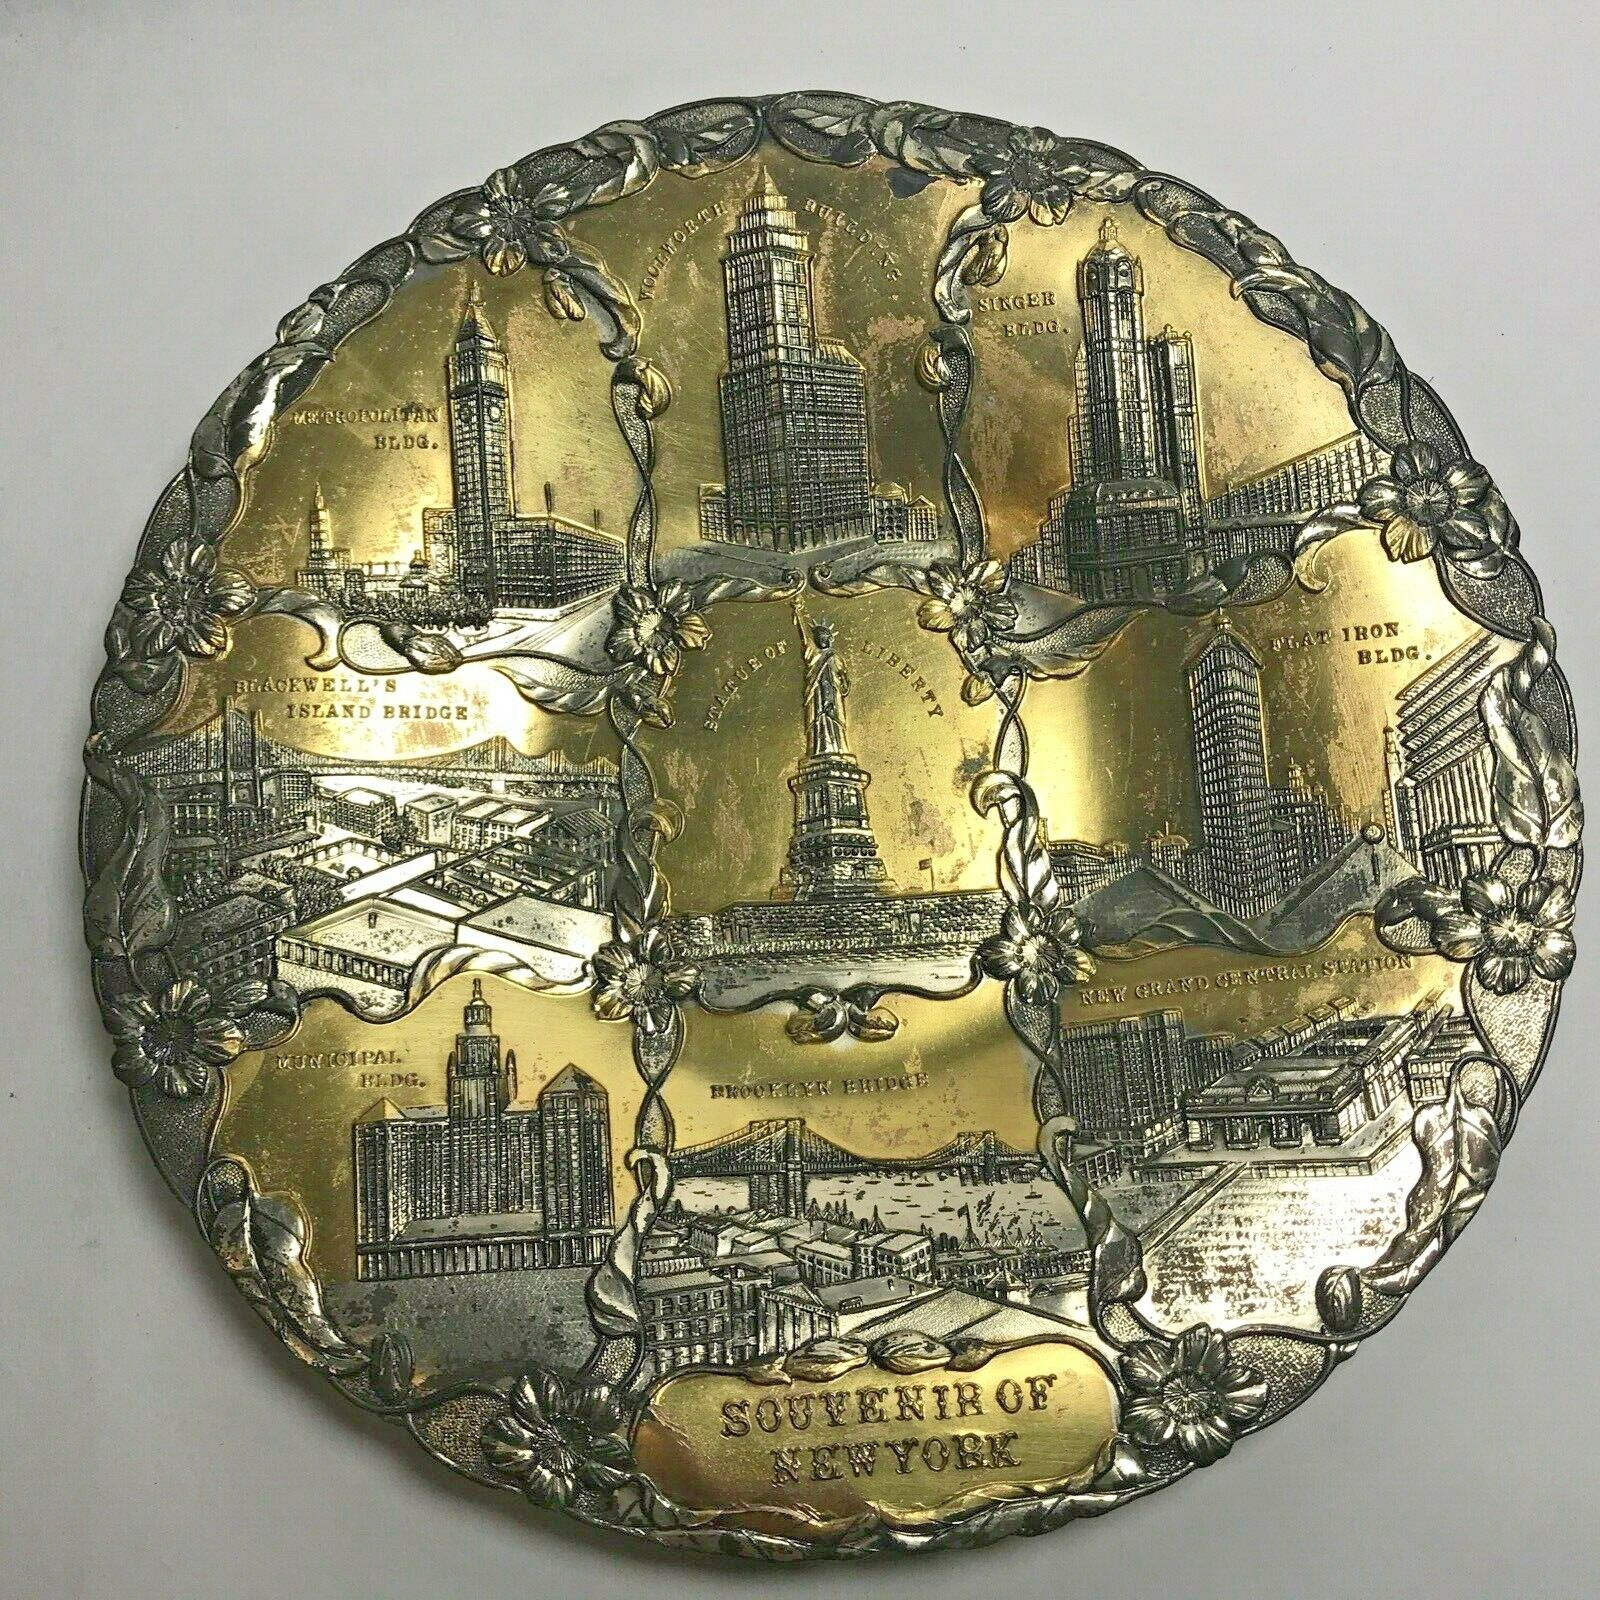 Antique Metal Plate Souvenir of New York Silver/Gold Tone Embossed Circa 1915